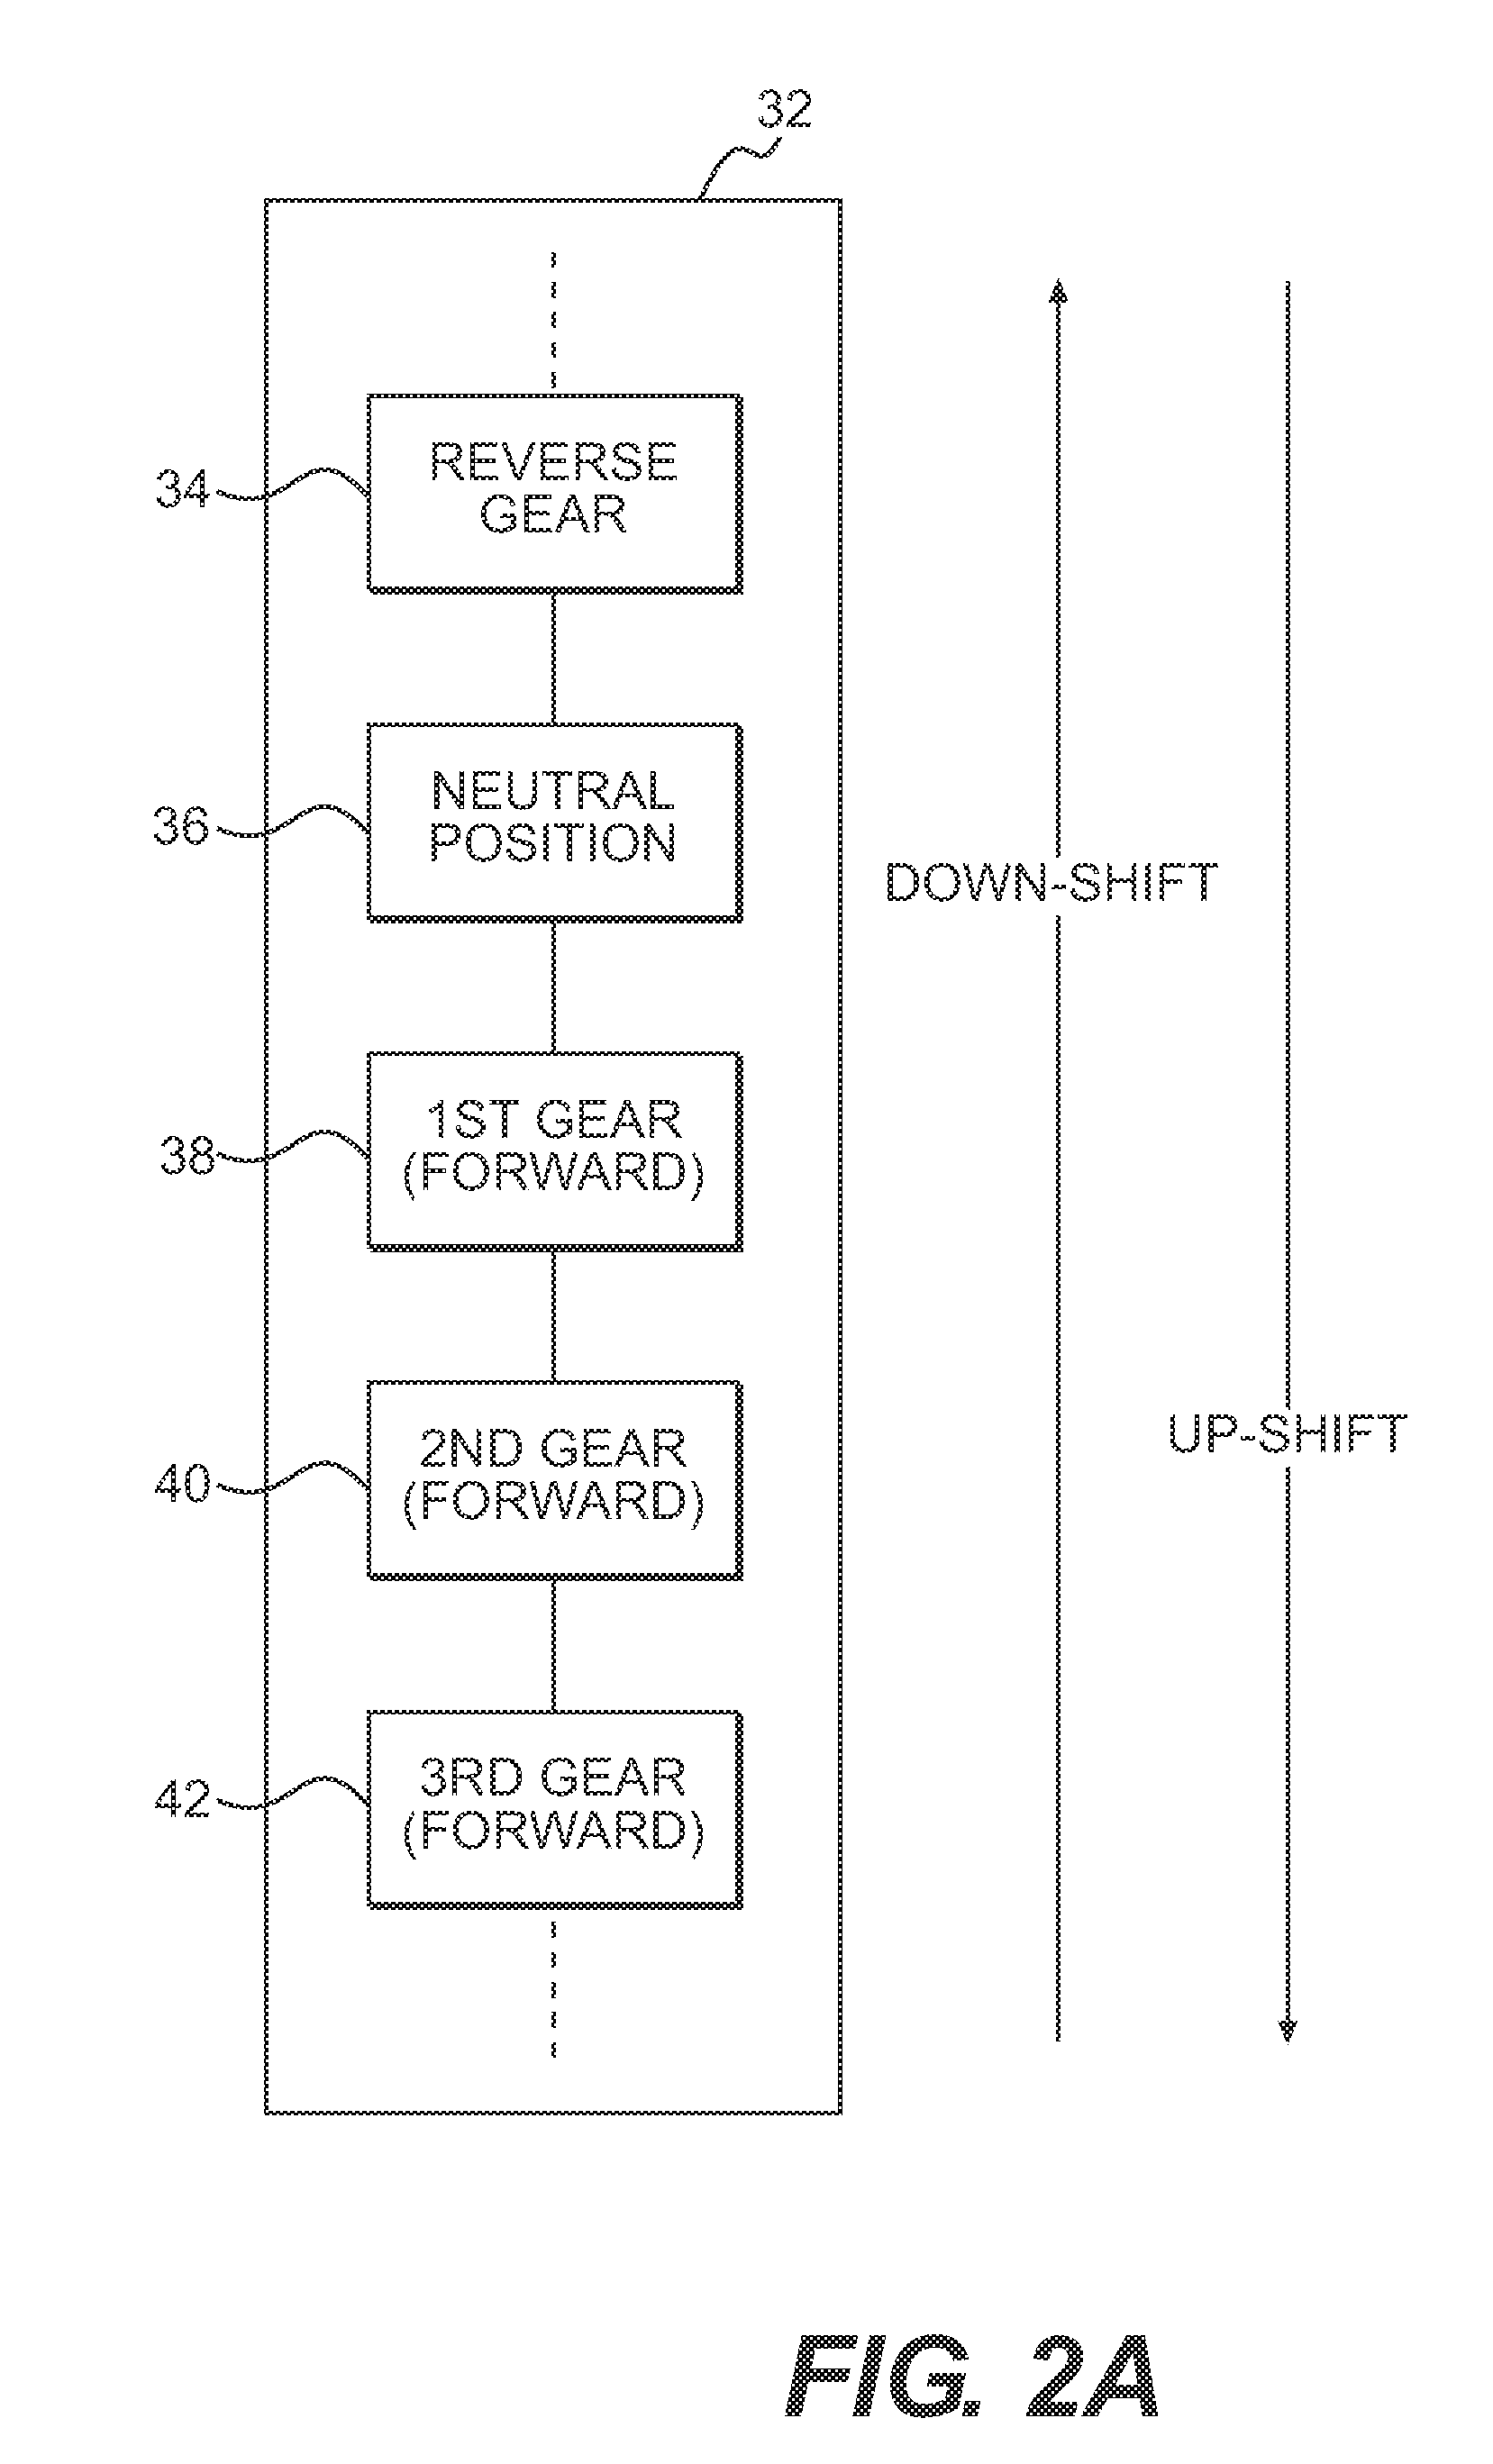 Vehicle with a semi-automatic transmission having a reverse gear